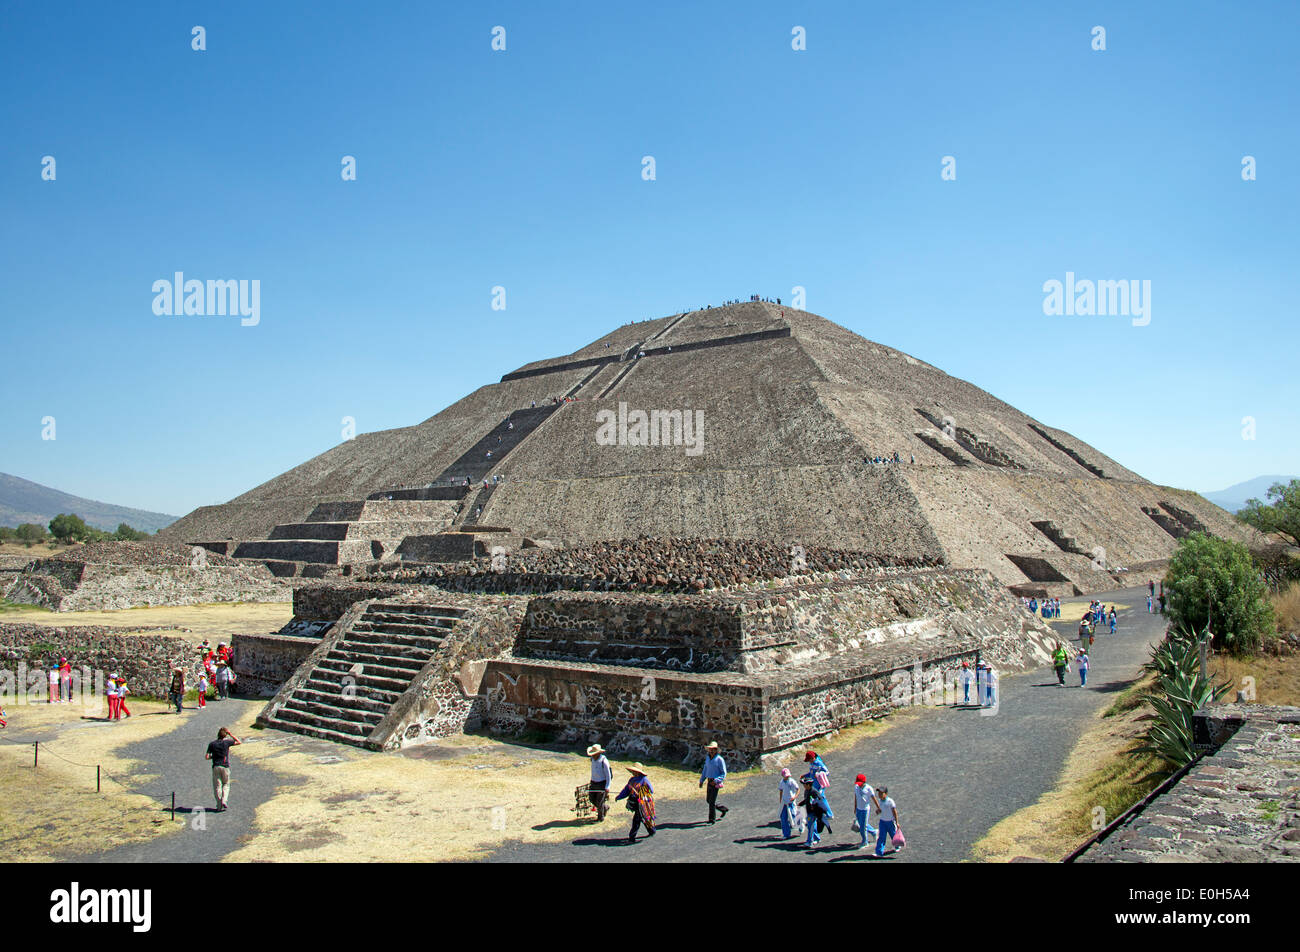 Pyramid of the Sun with visitors arriving Teotihuacan Mexico Stock Photo